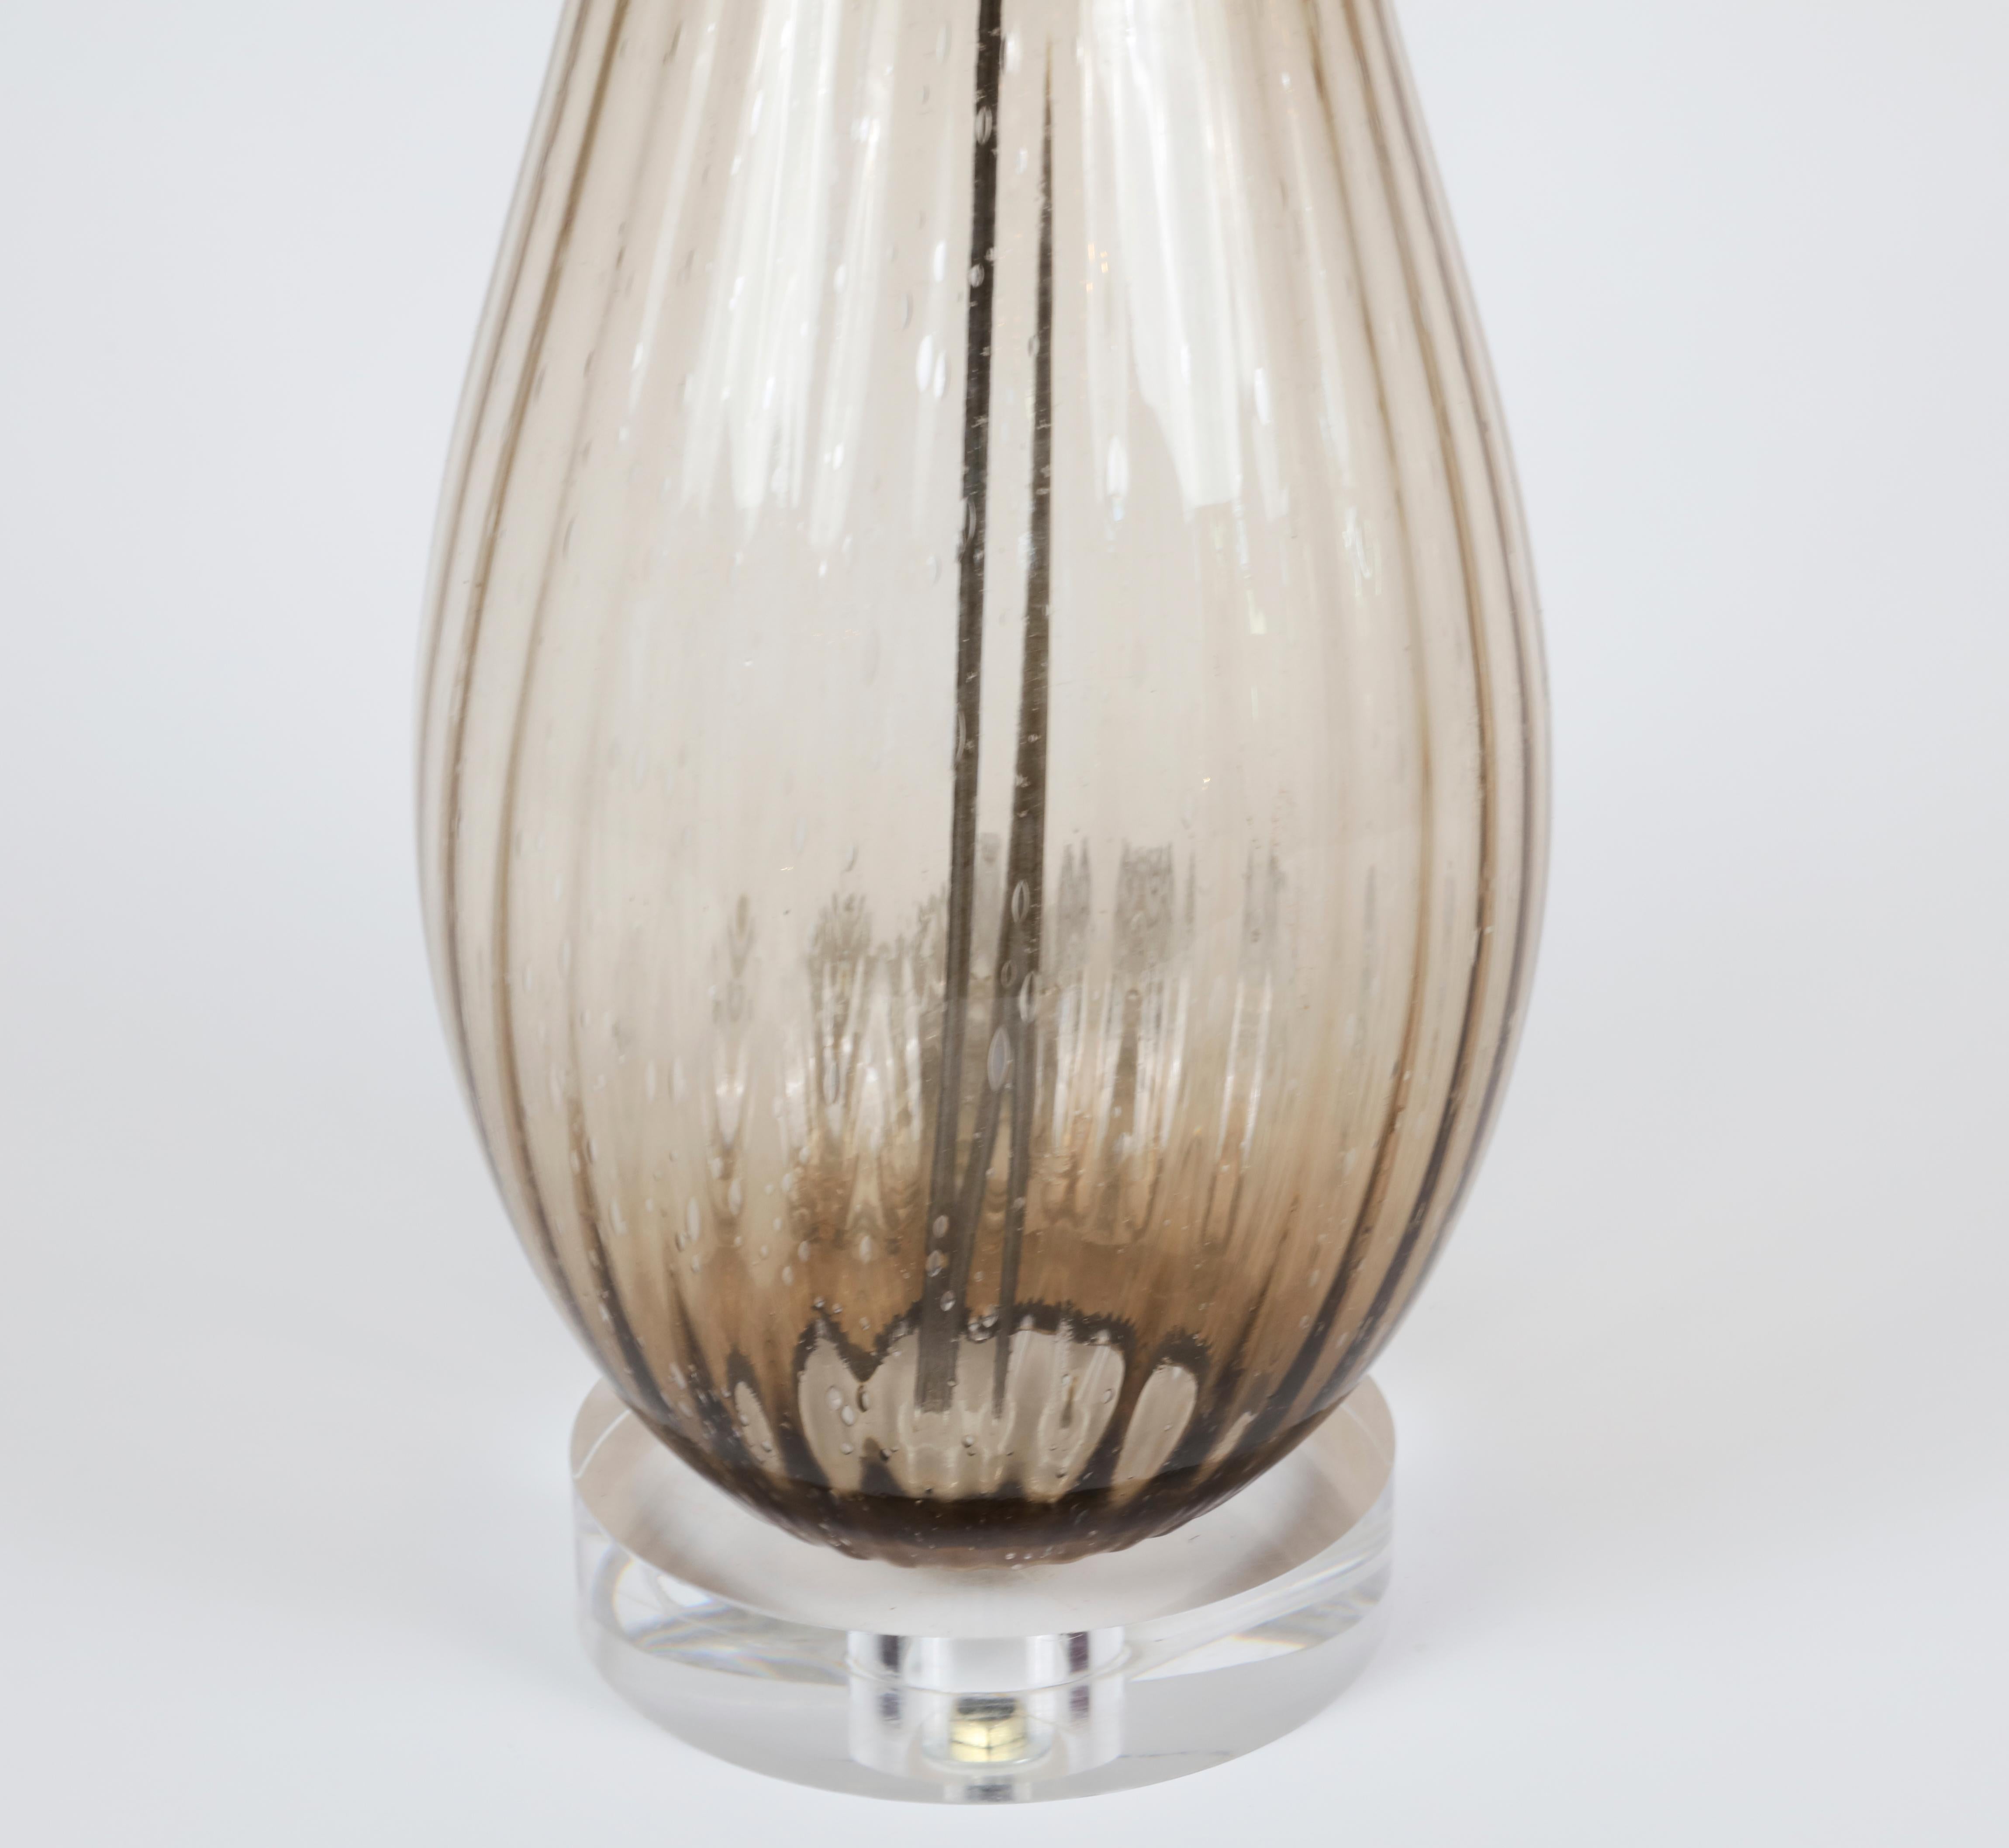 Smoked glass lamp with shade and Lucite base

Measures: 30